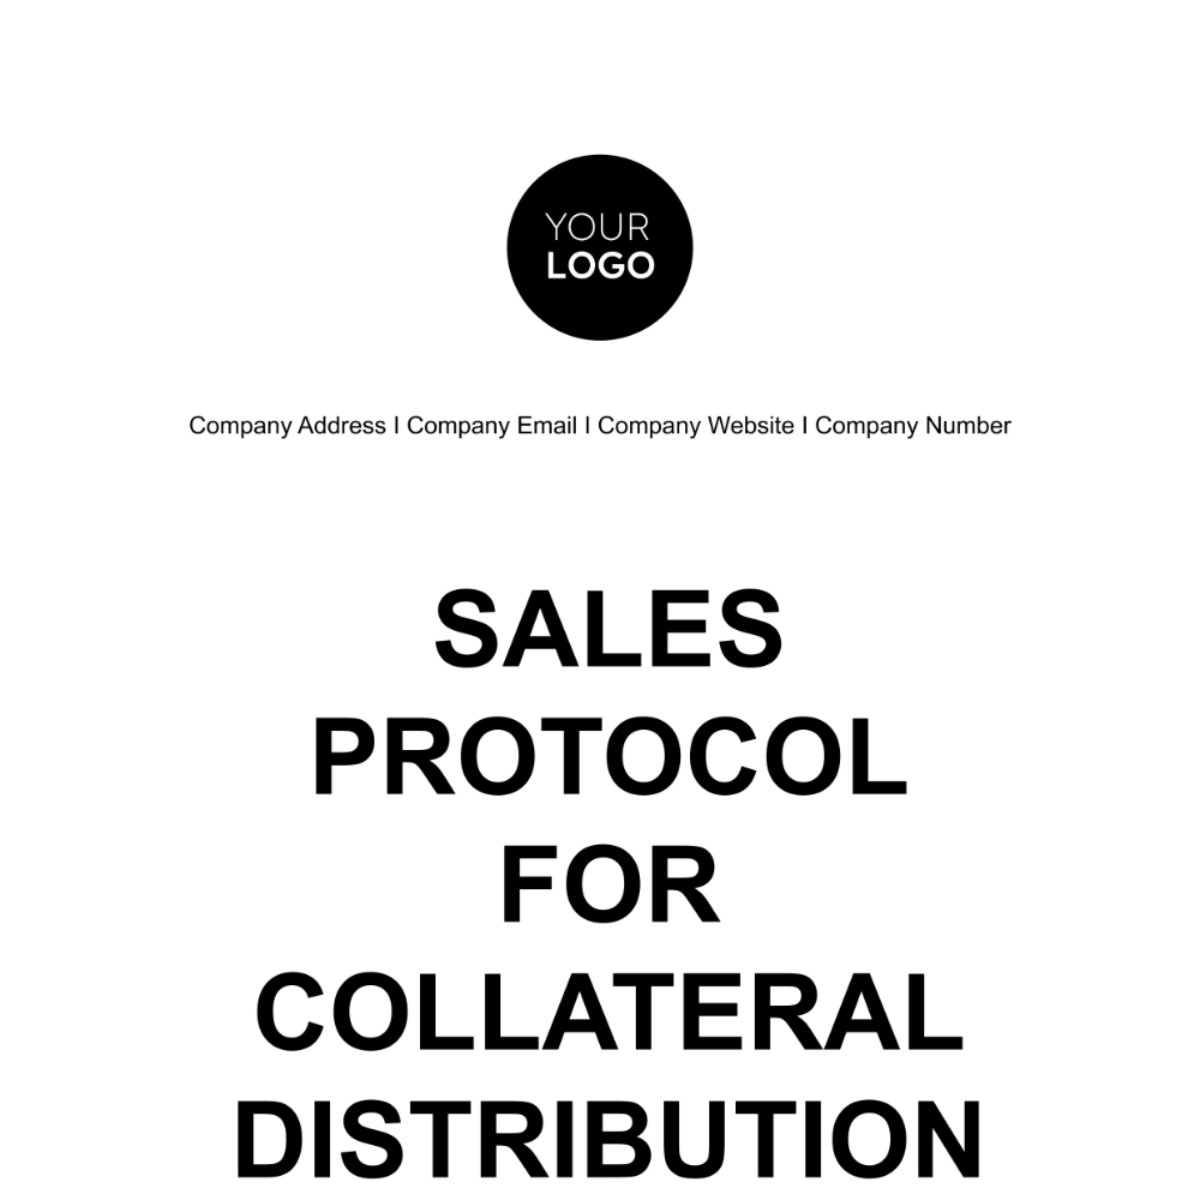 Free Sales Protocol for Collateral Distribution Template